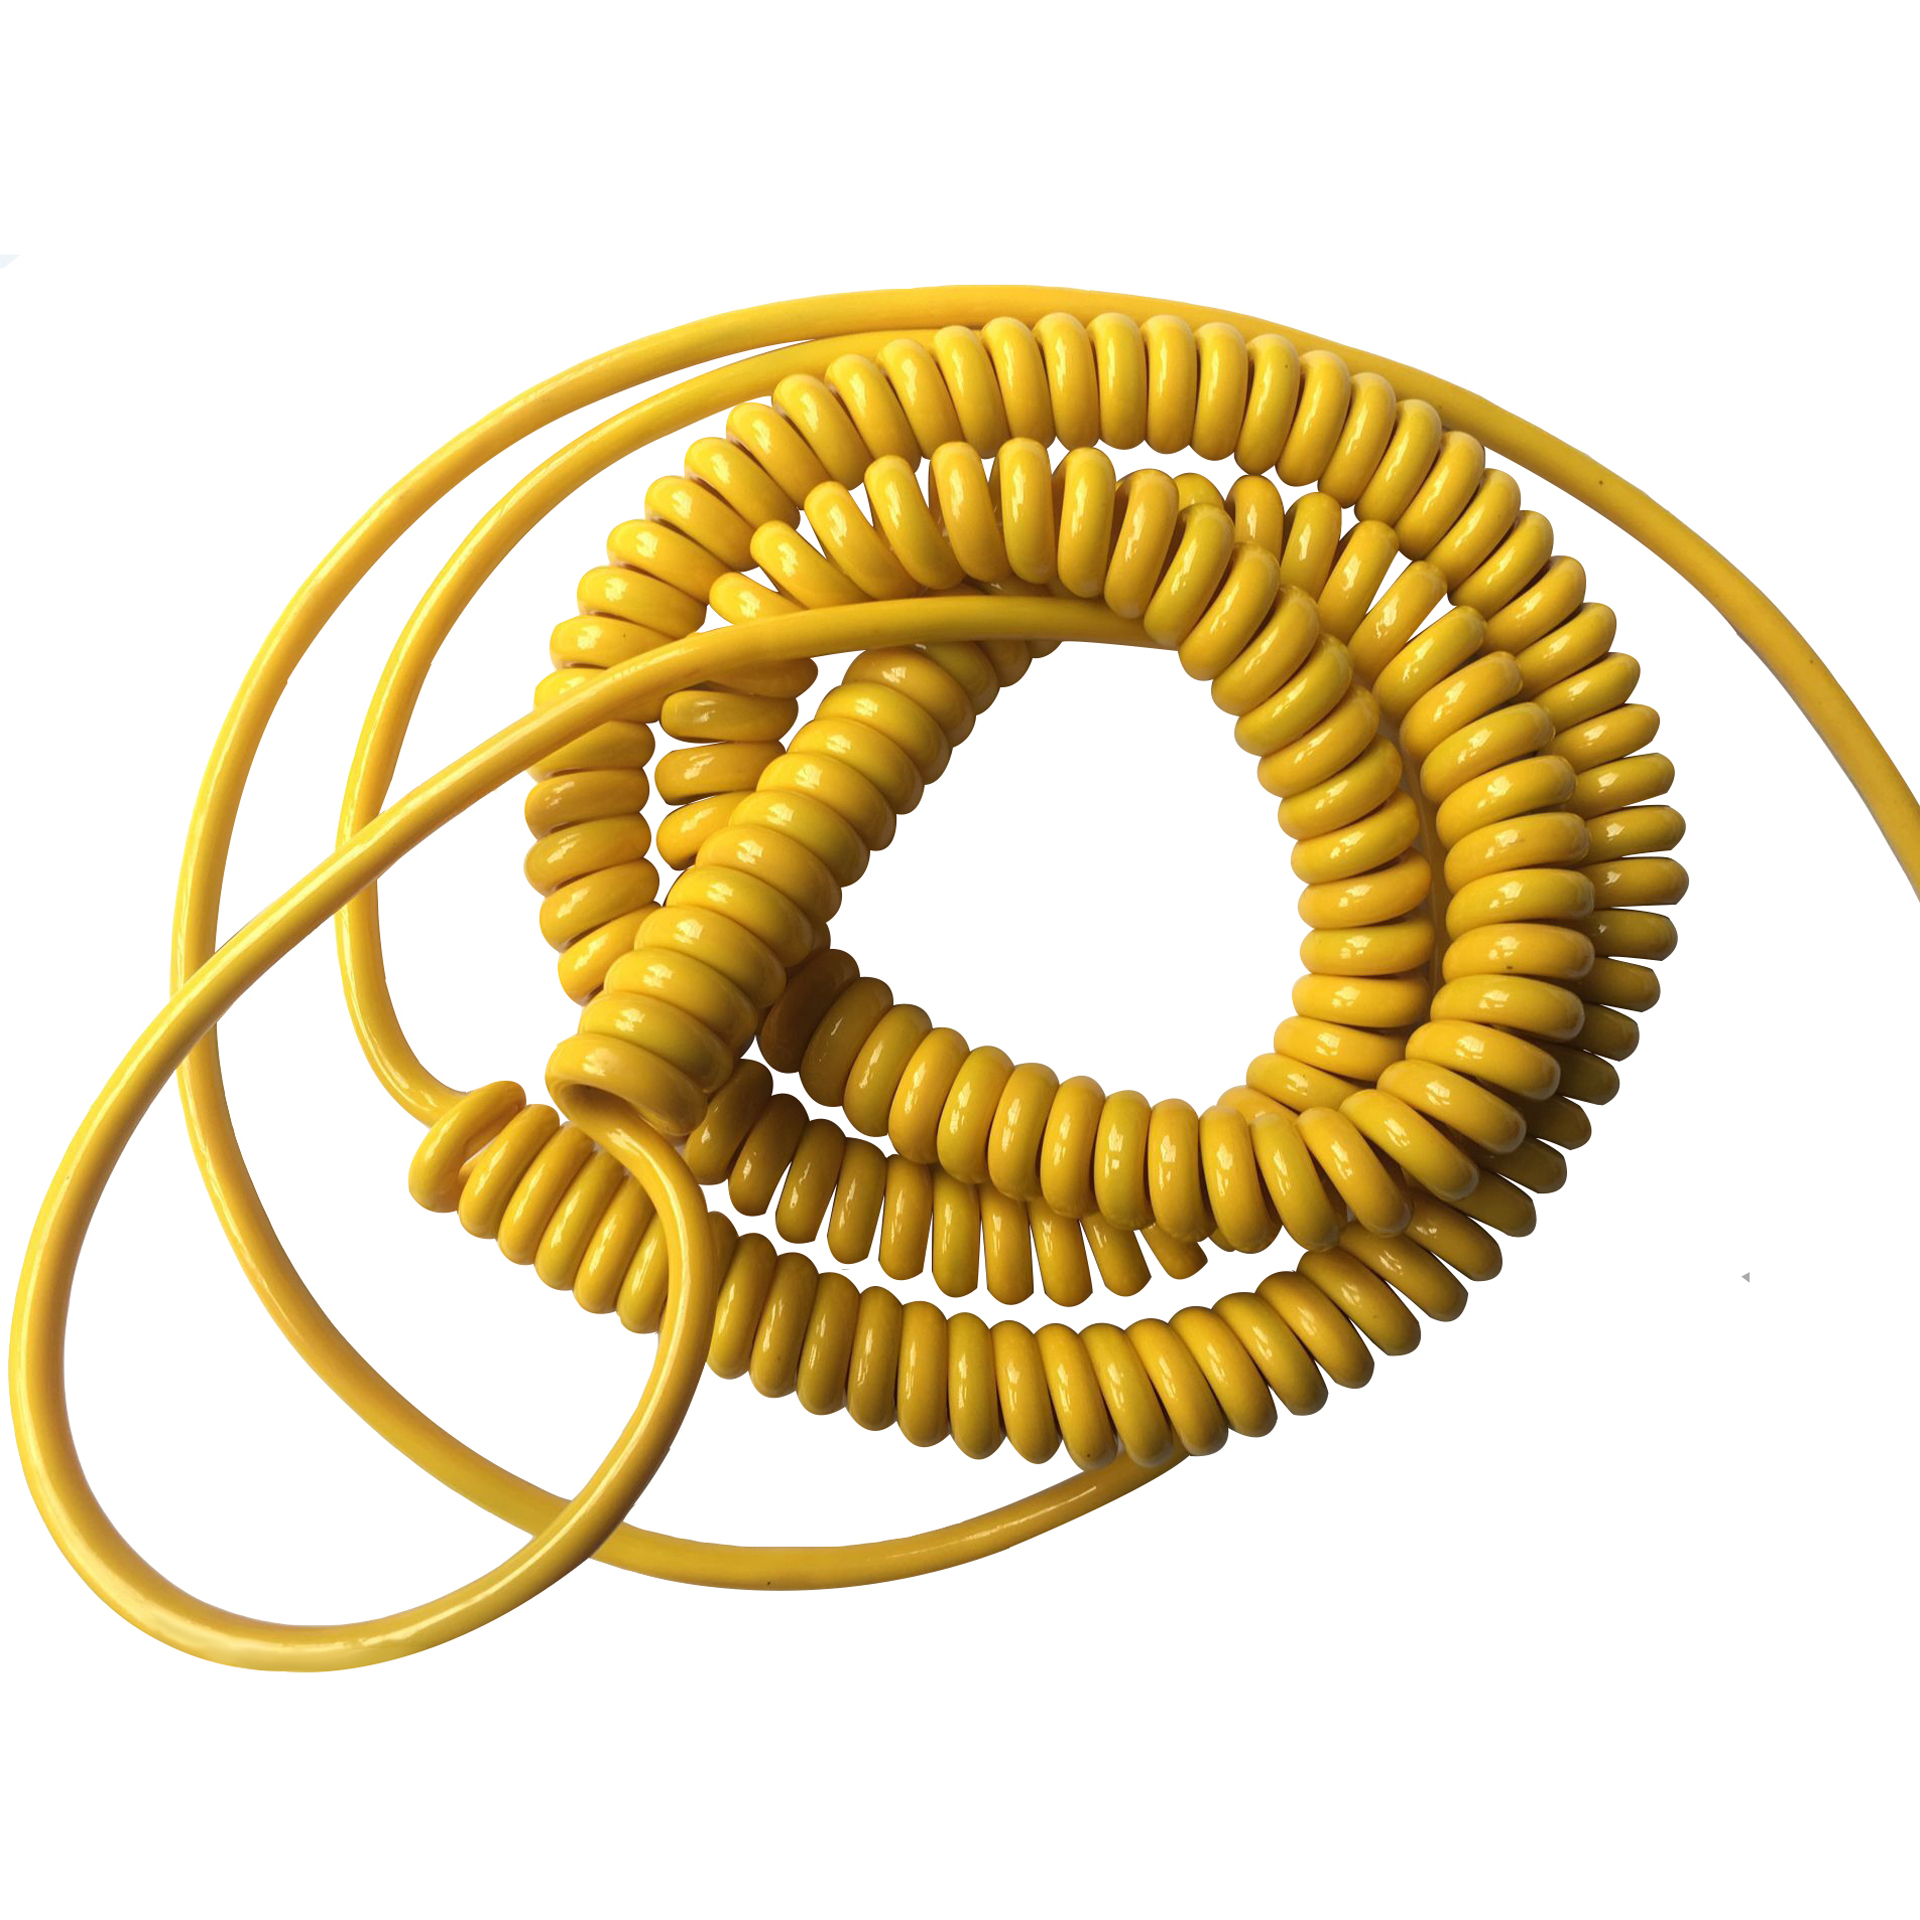 1000 mm coil closed length 5 6 7 8 core yellow pur material coiled cable extend lengh reach 10 meters long